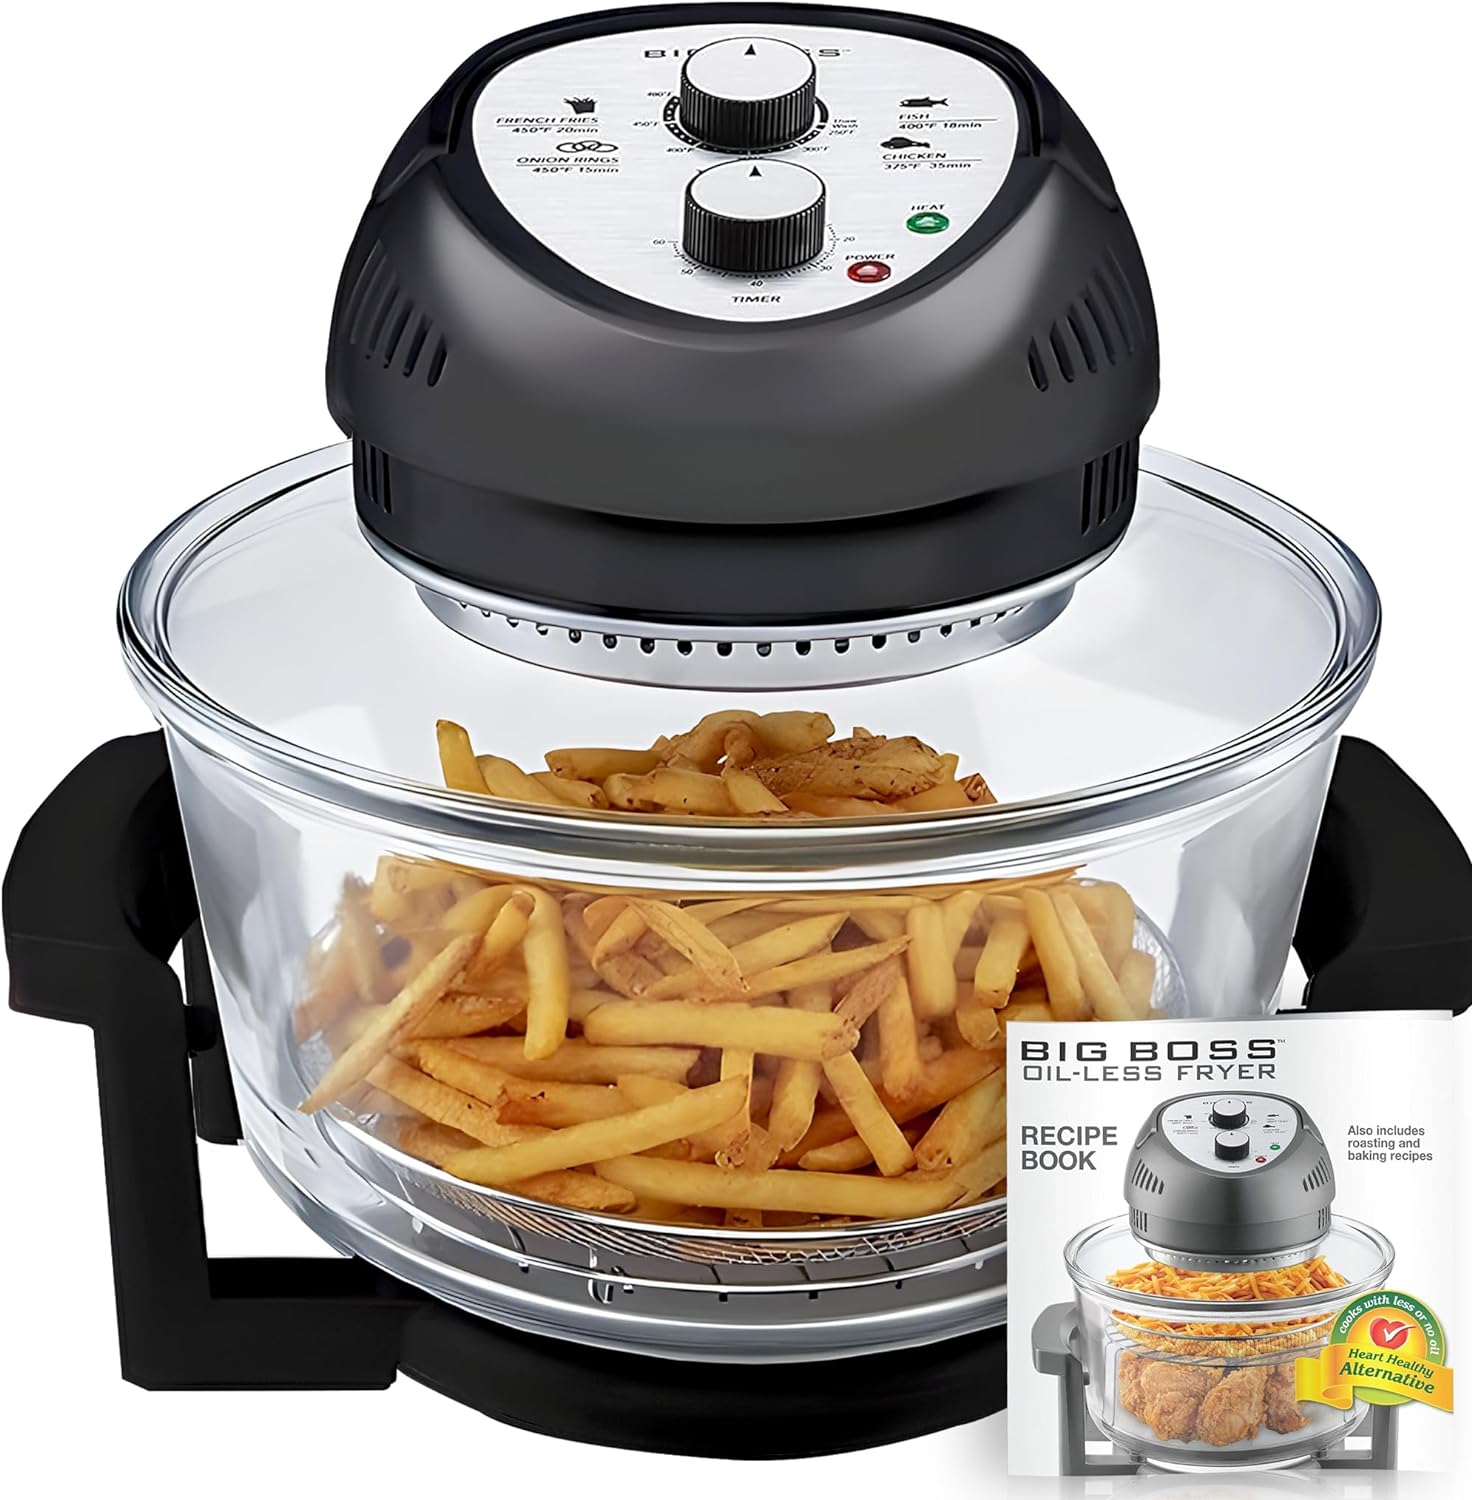 Big Boss 16Qt Large Air Fryer Oven with 50+ Recipe Book AirFryer Oven Makes Healthier Crispy Foods Black - image 1 of 8